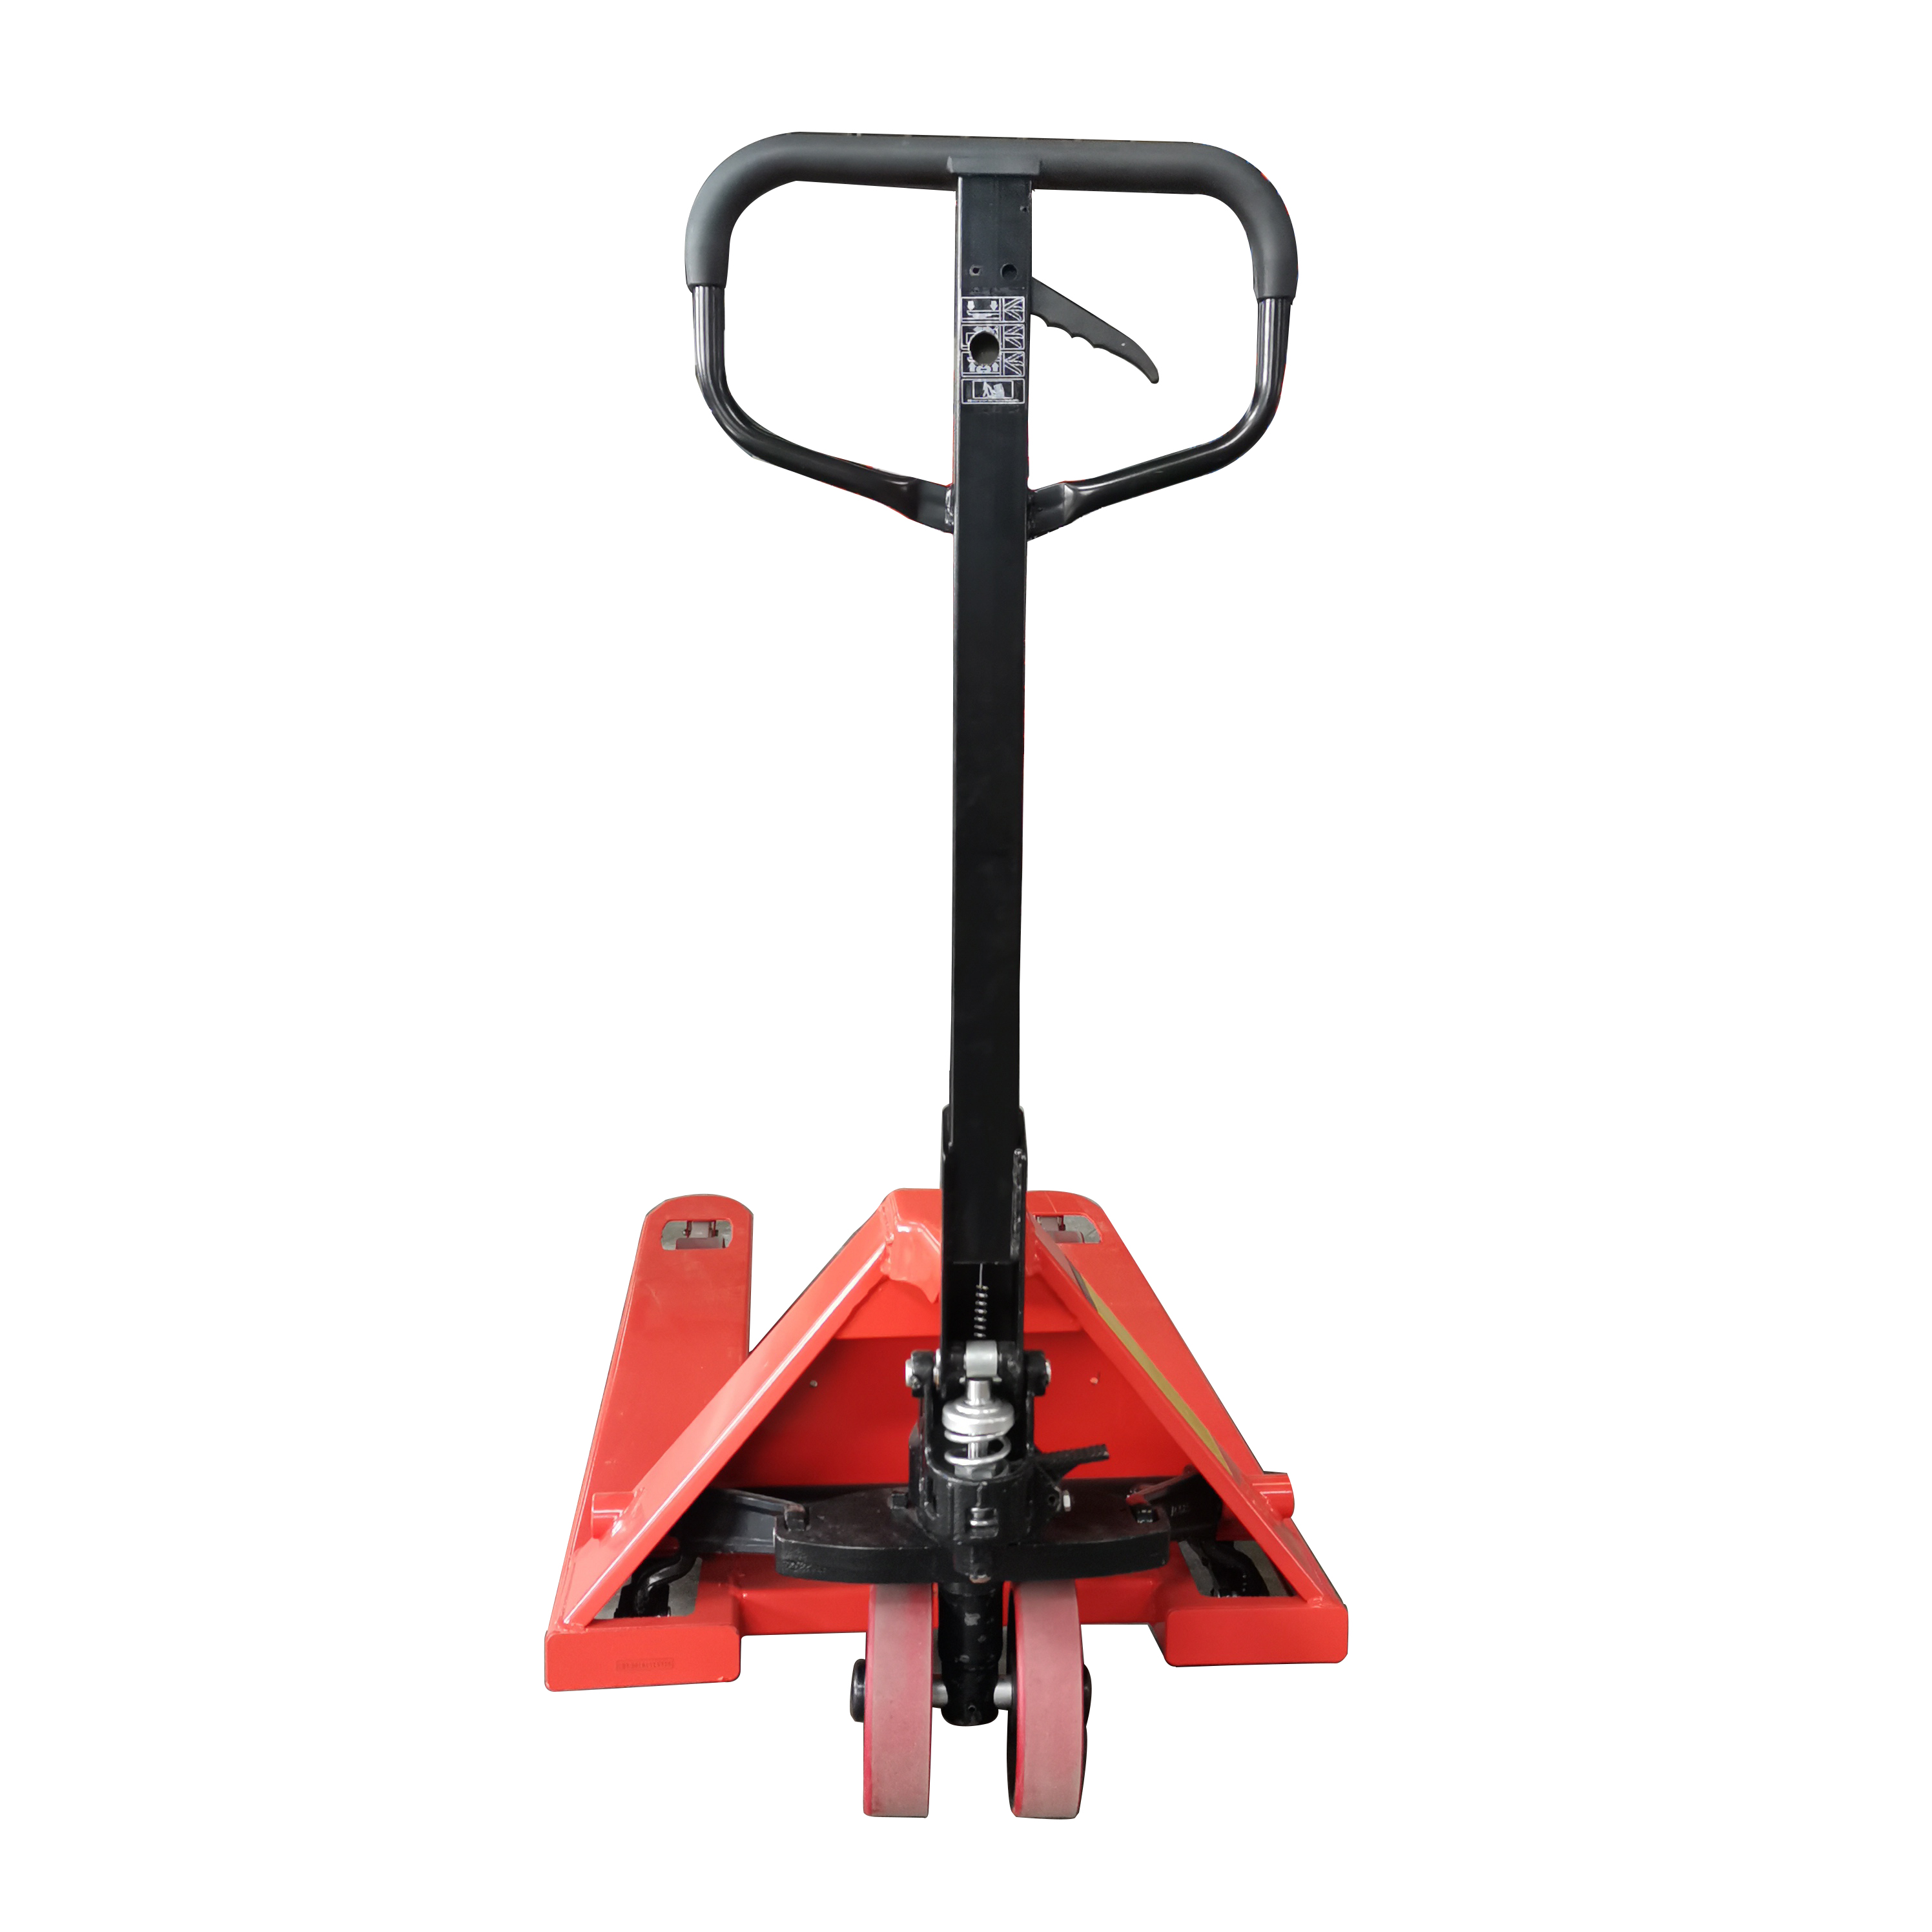 NIULI High Quality Casting Hydraulic Pump Manual Forklift 2ton 3ton Pallet Fork Lift Jack Hand Pallet Truck 2500kg for Sale